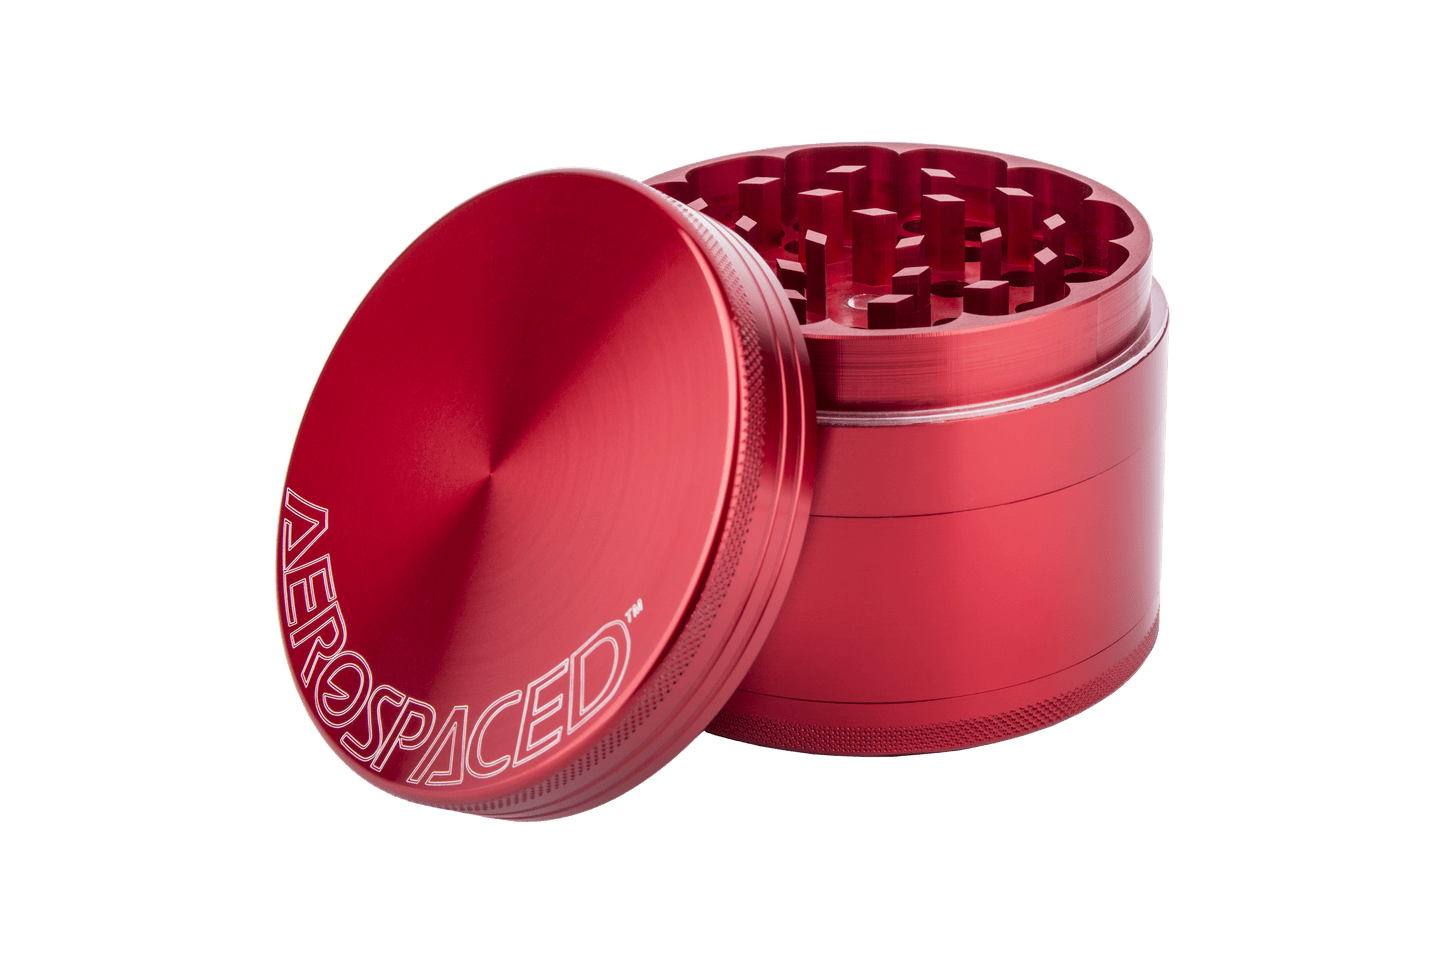 2.5"(63mm) / red / 4pc Aerospaced by Higher Standards - 4 Piece Grinder - 2.5"